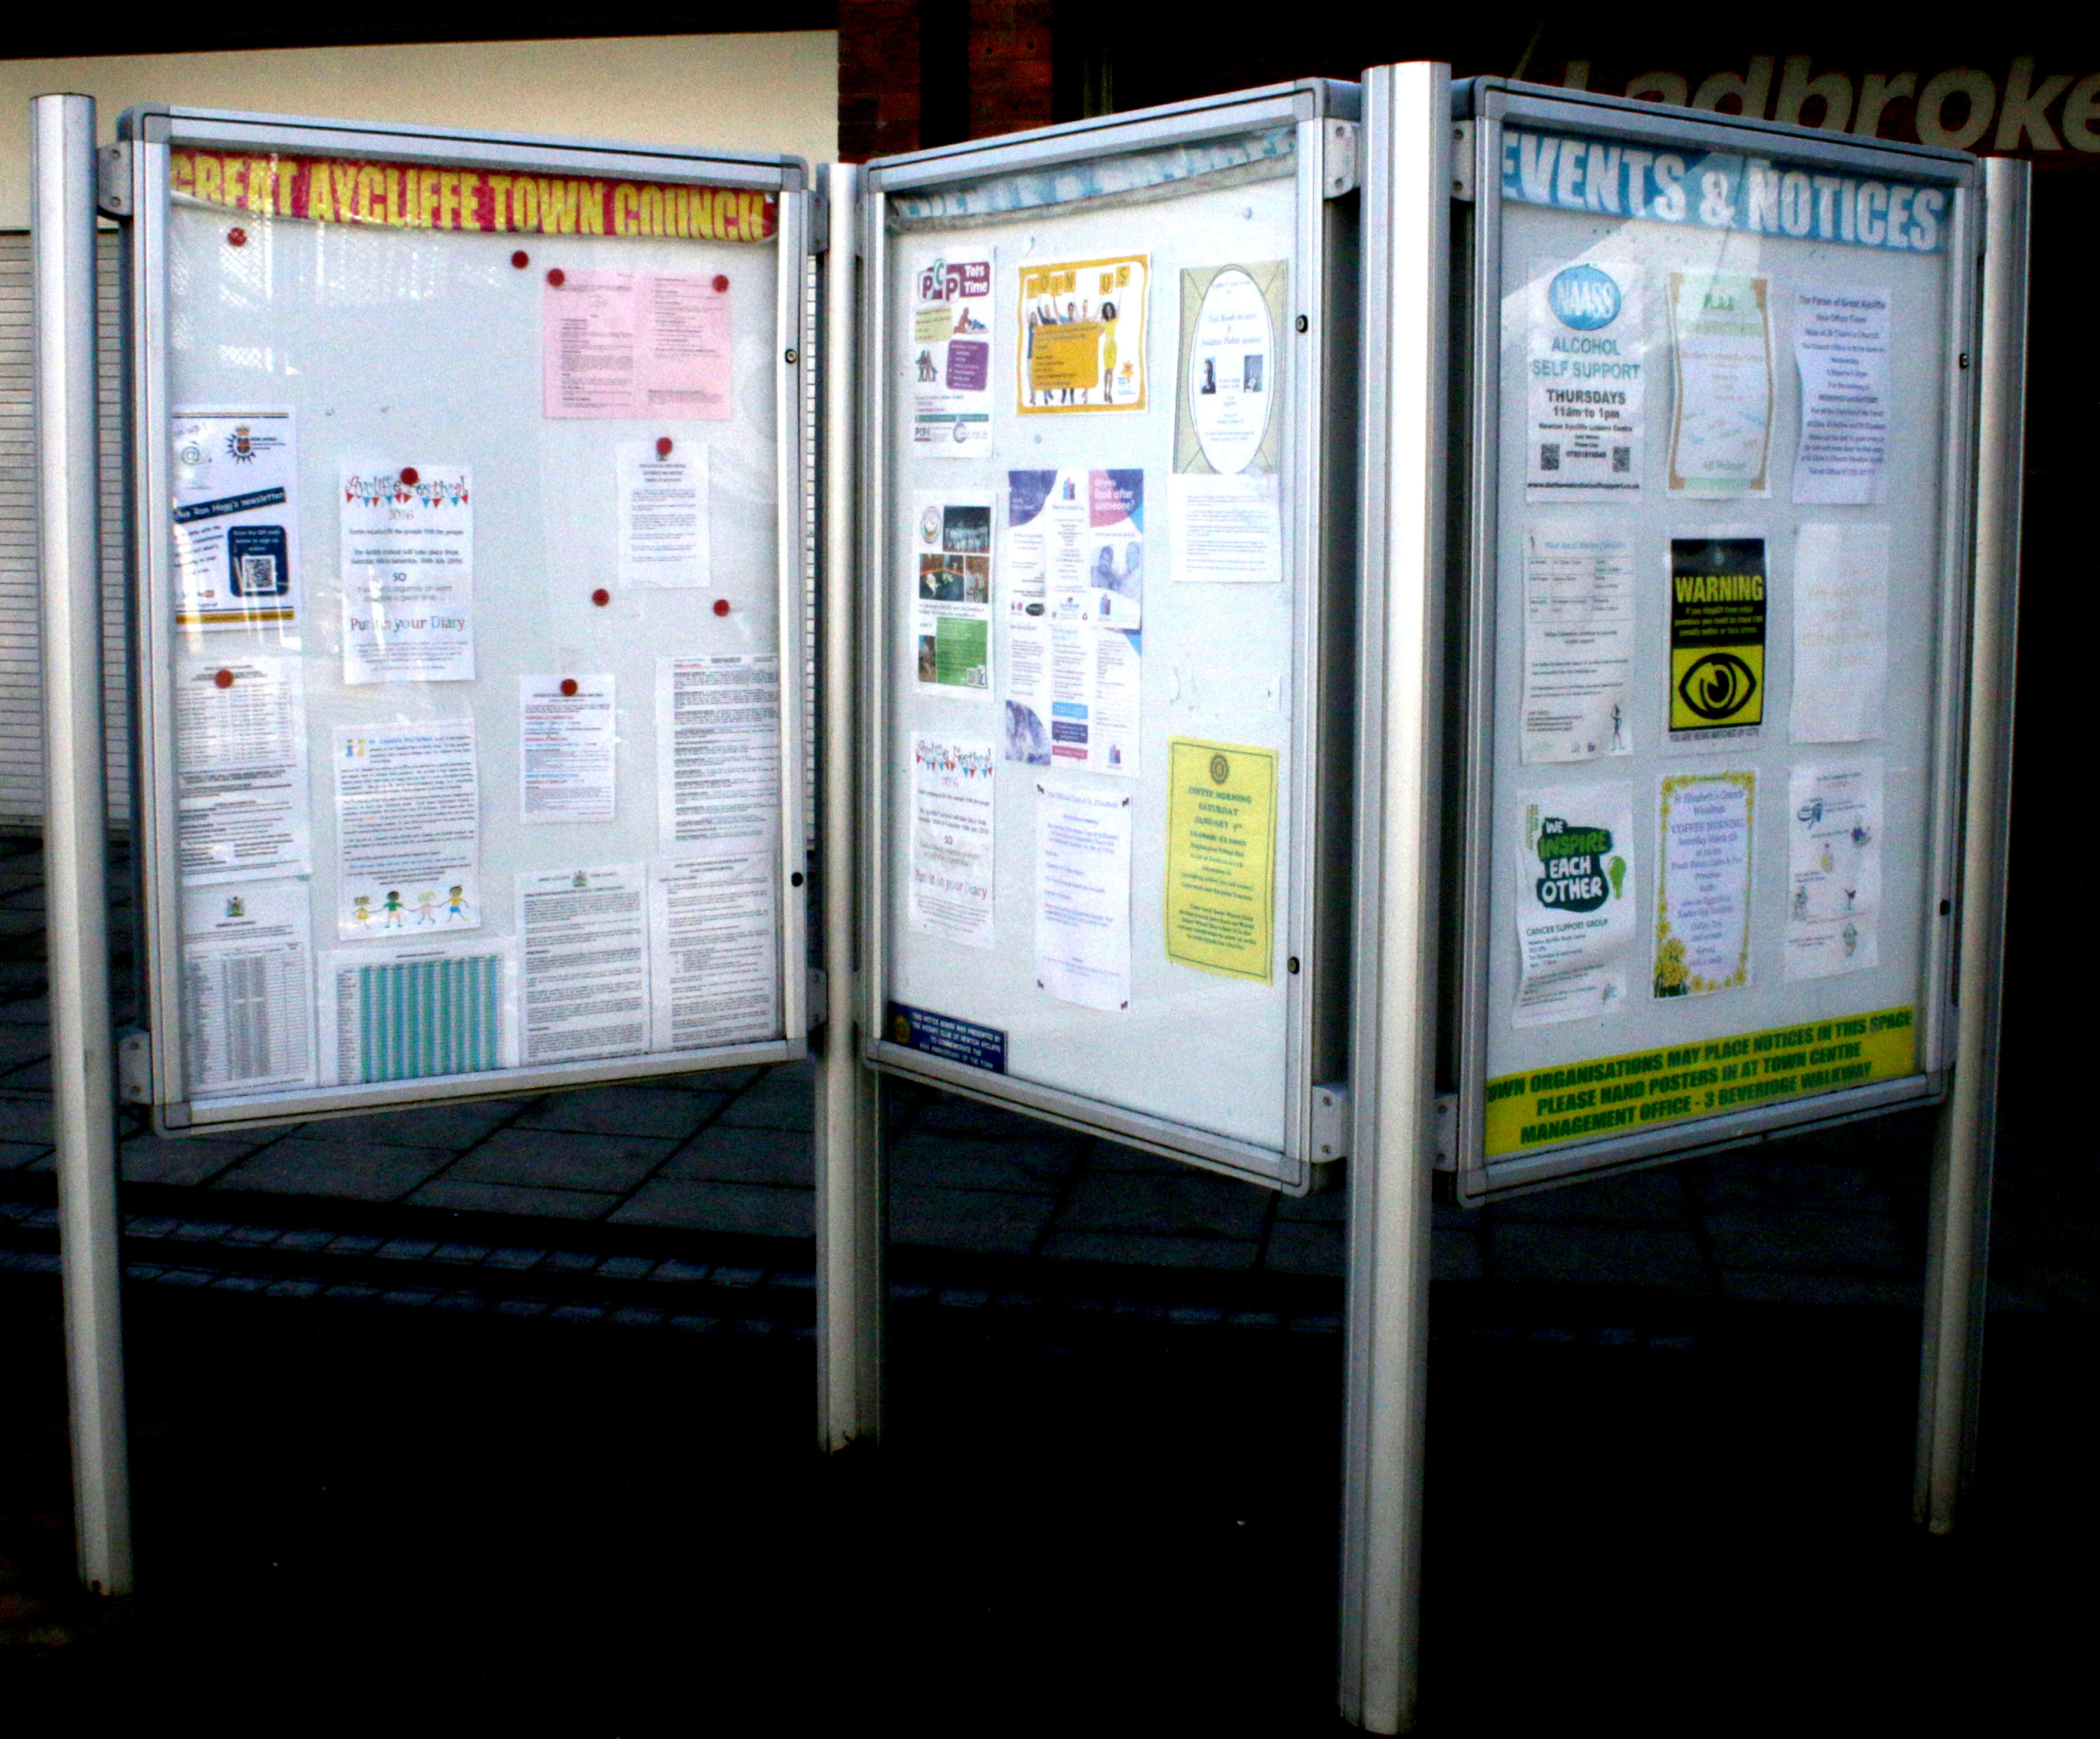 Do You Use the Town Centre Notice Board?